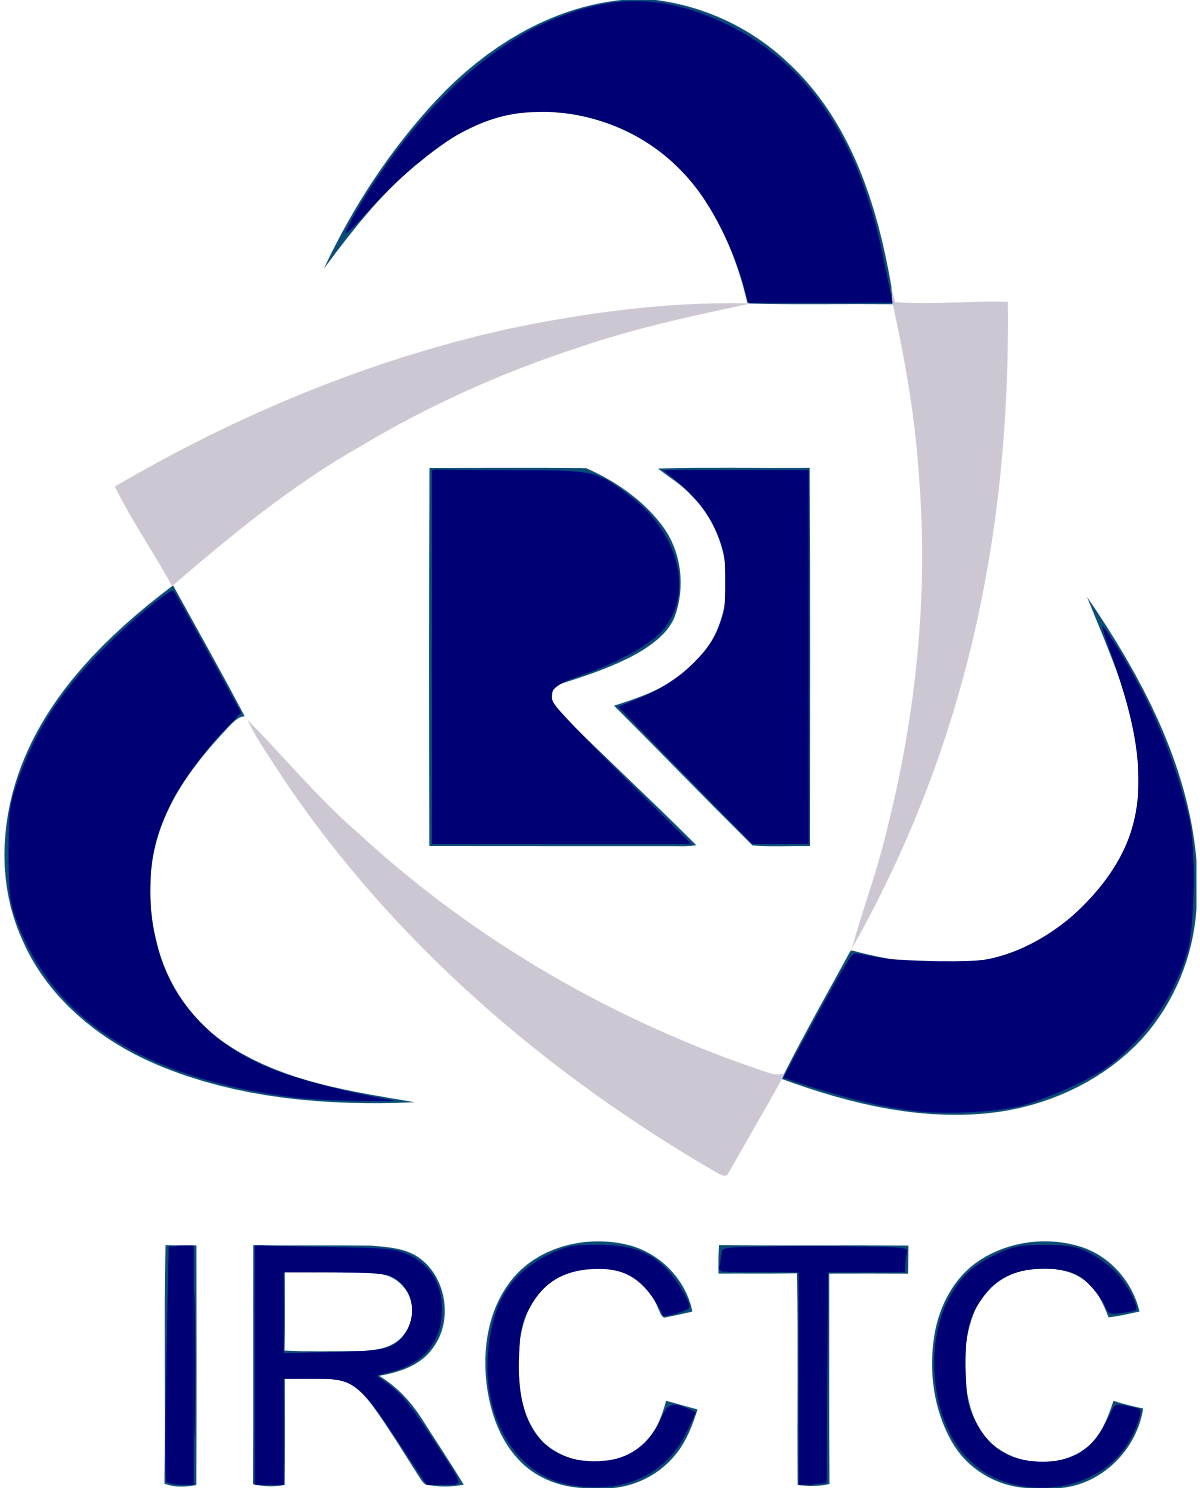 Varanasi: More than two hundred IDs of IRCTC blacklisted, those brokering railway tickets will be banned.